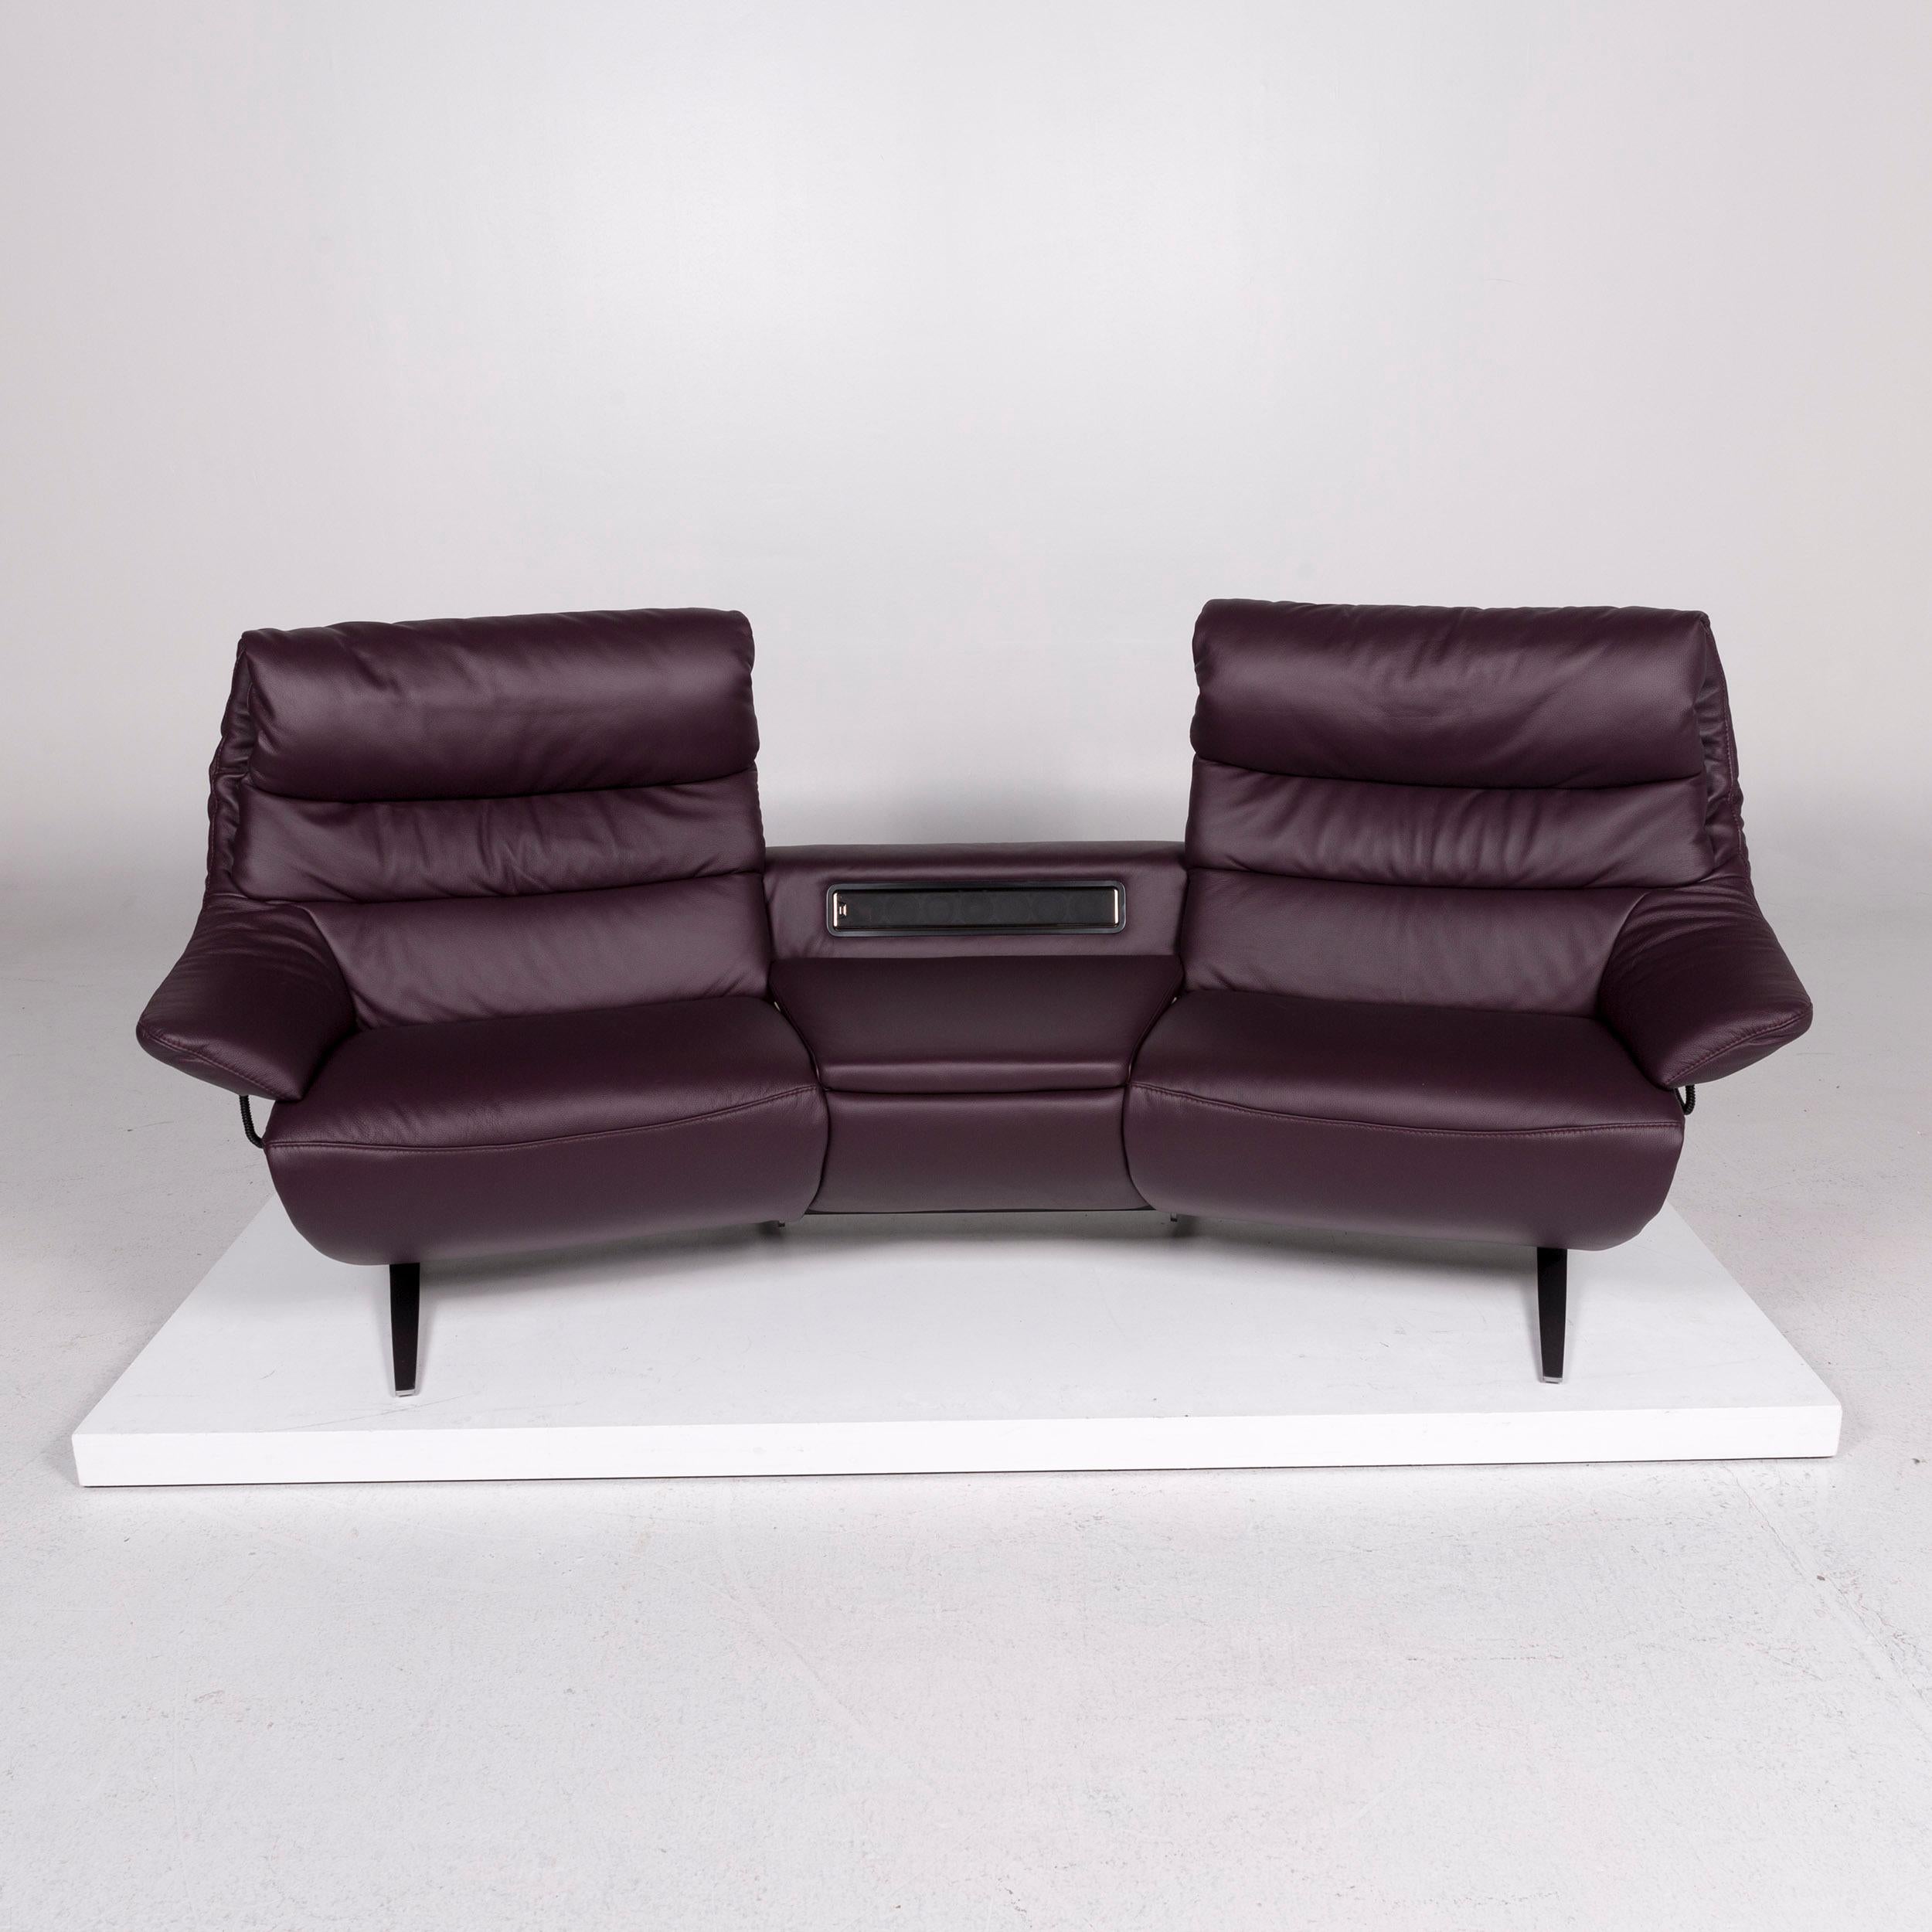 Himolla Leather Sofa Eggplant Purple Relax Function Electrical Function Couch 3